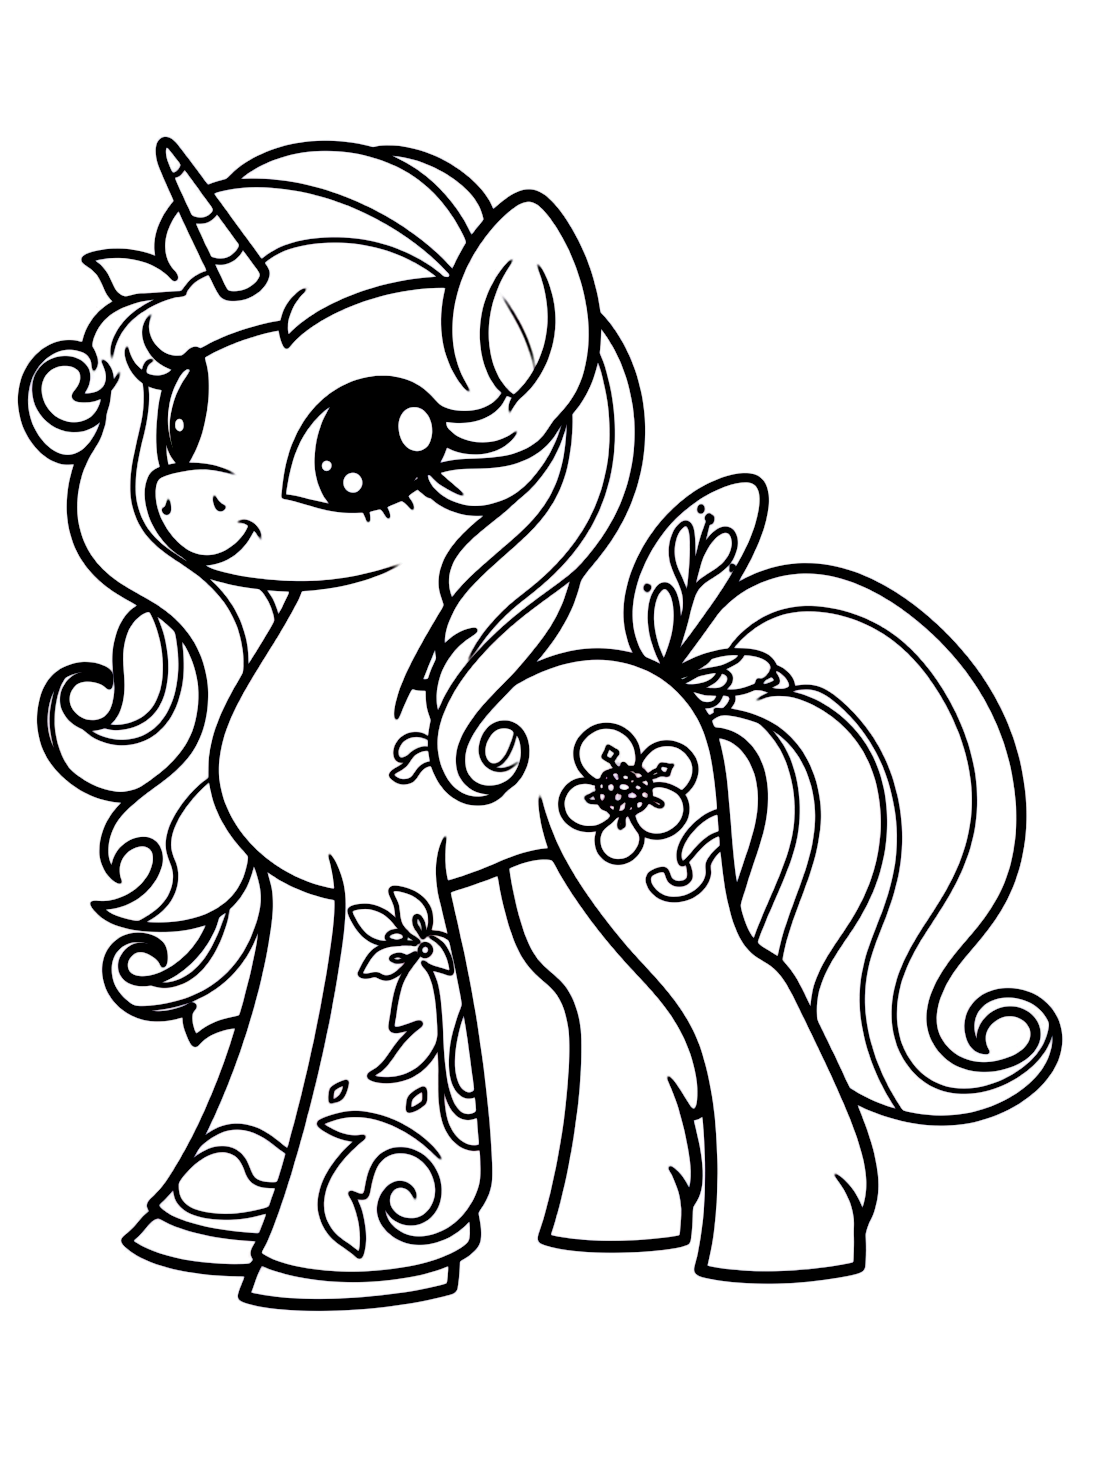 Fluttershy My little Pony Coloring Pages